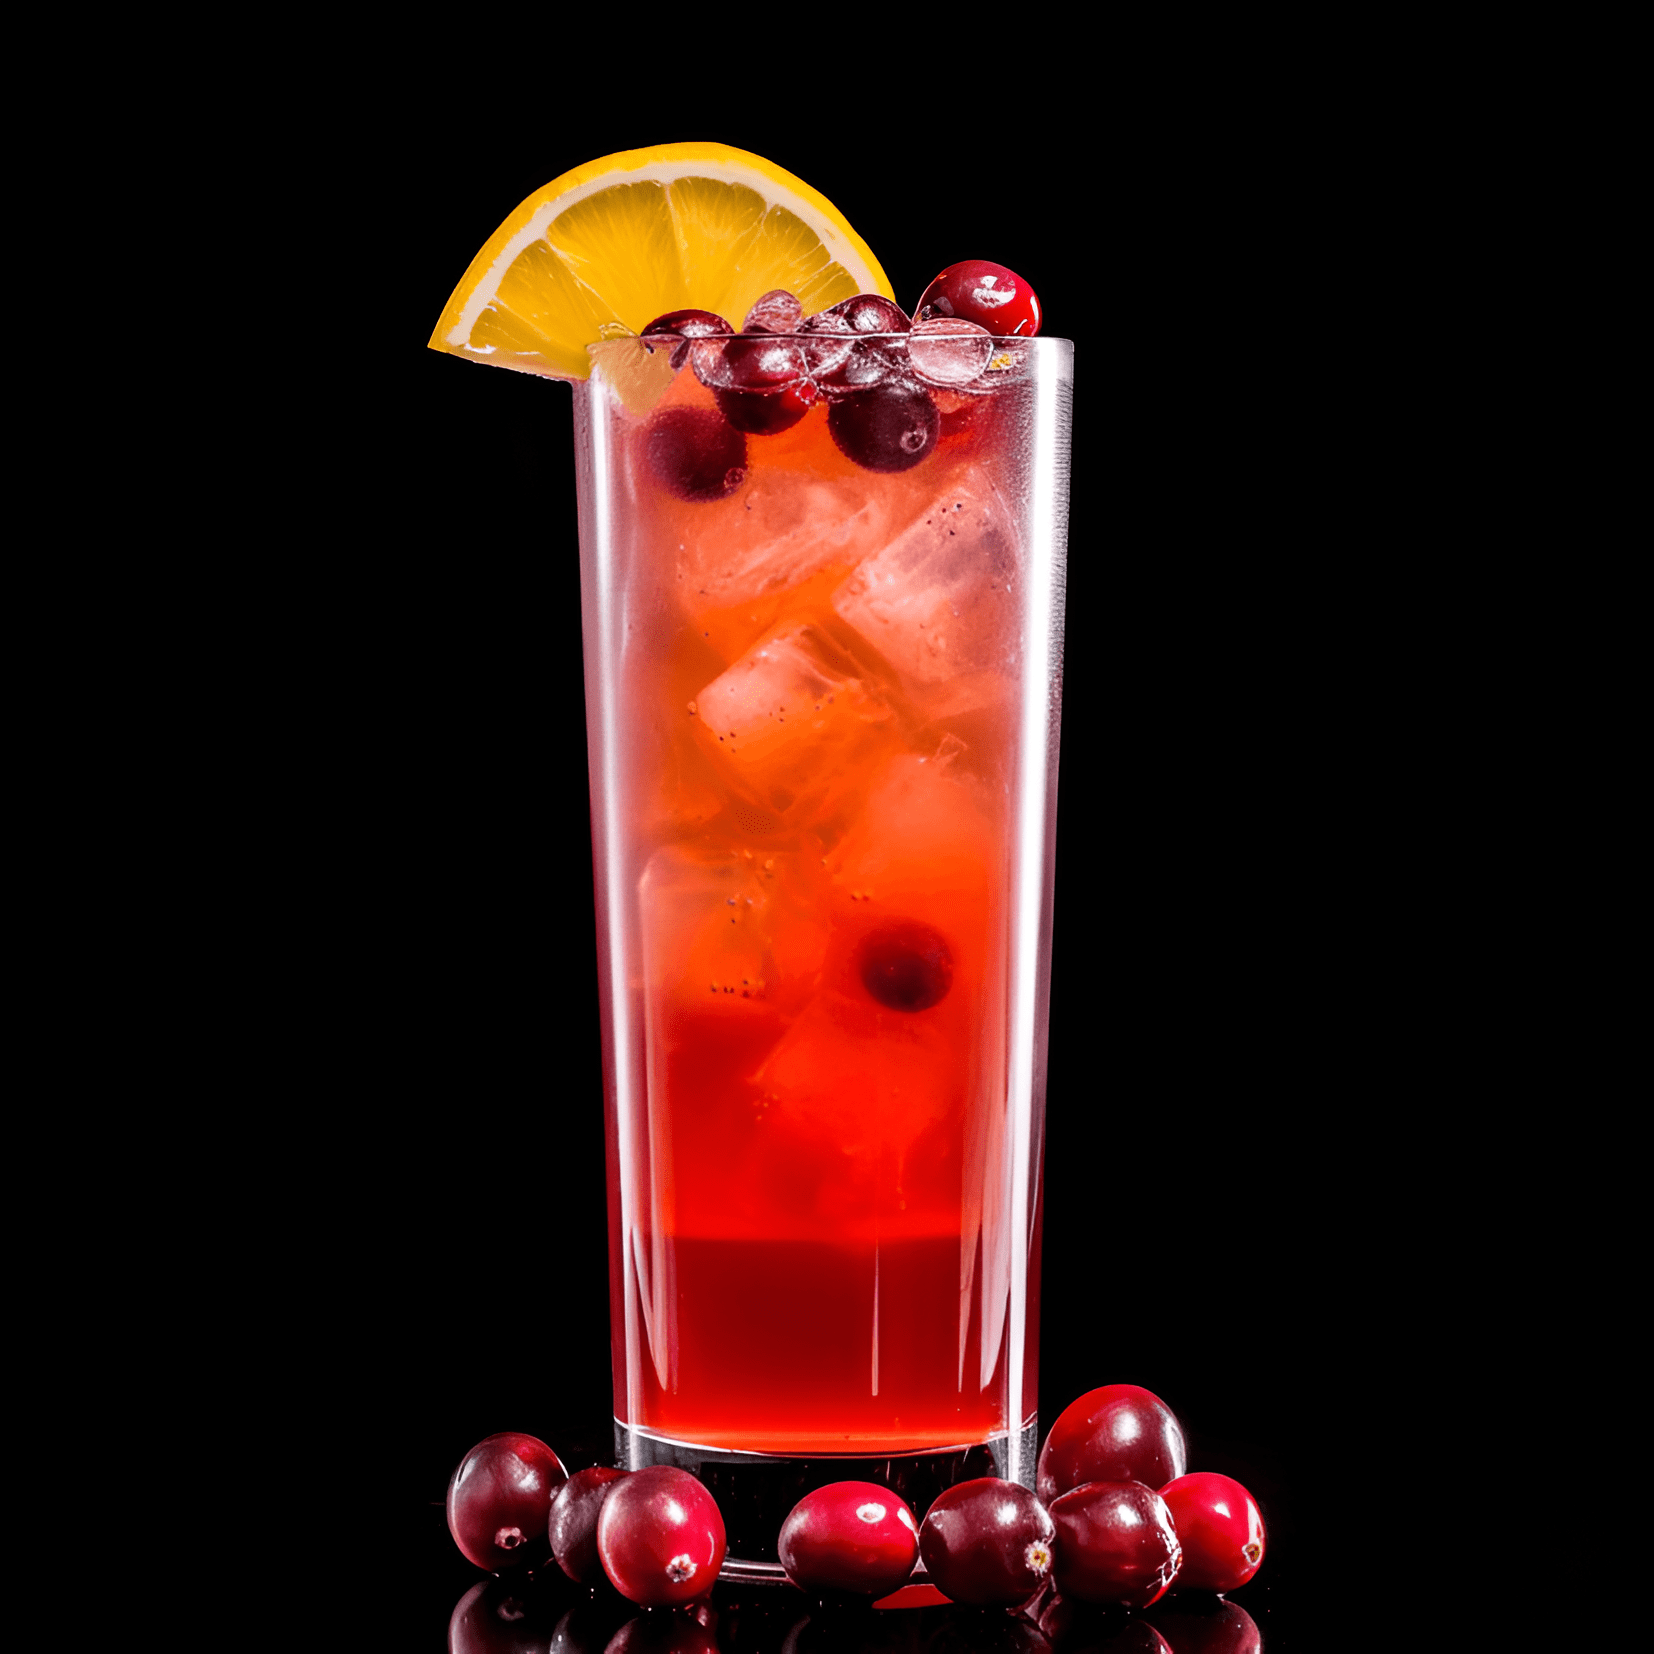 Cranberry Cooler Cocktail Recipe - The Cranberry Cooler has a delightful balance of sweet and tart flavors, with a refreshing and crisp taste. The combination of cranberry juice, orange juice, and lemon-lime soda creates a fruity and zesty sensation, while the vodka adds a subtle kick.